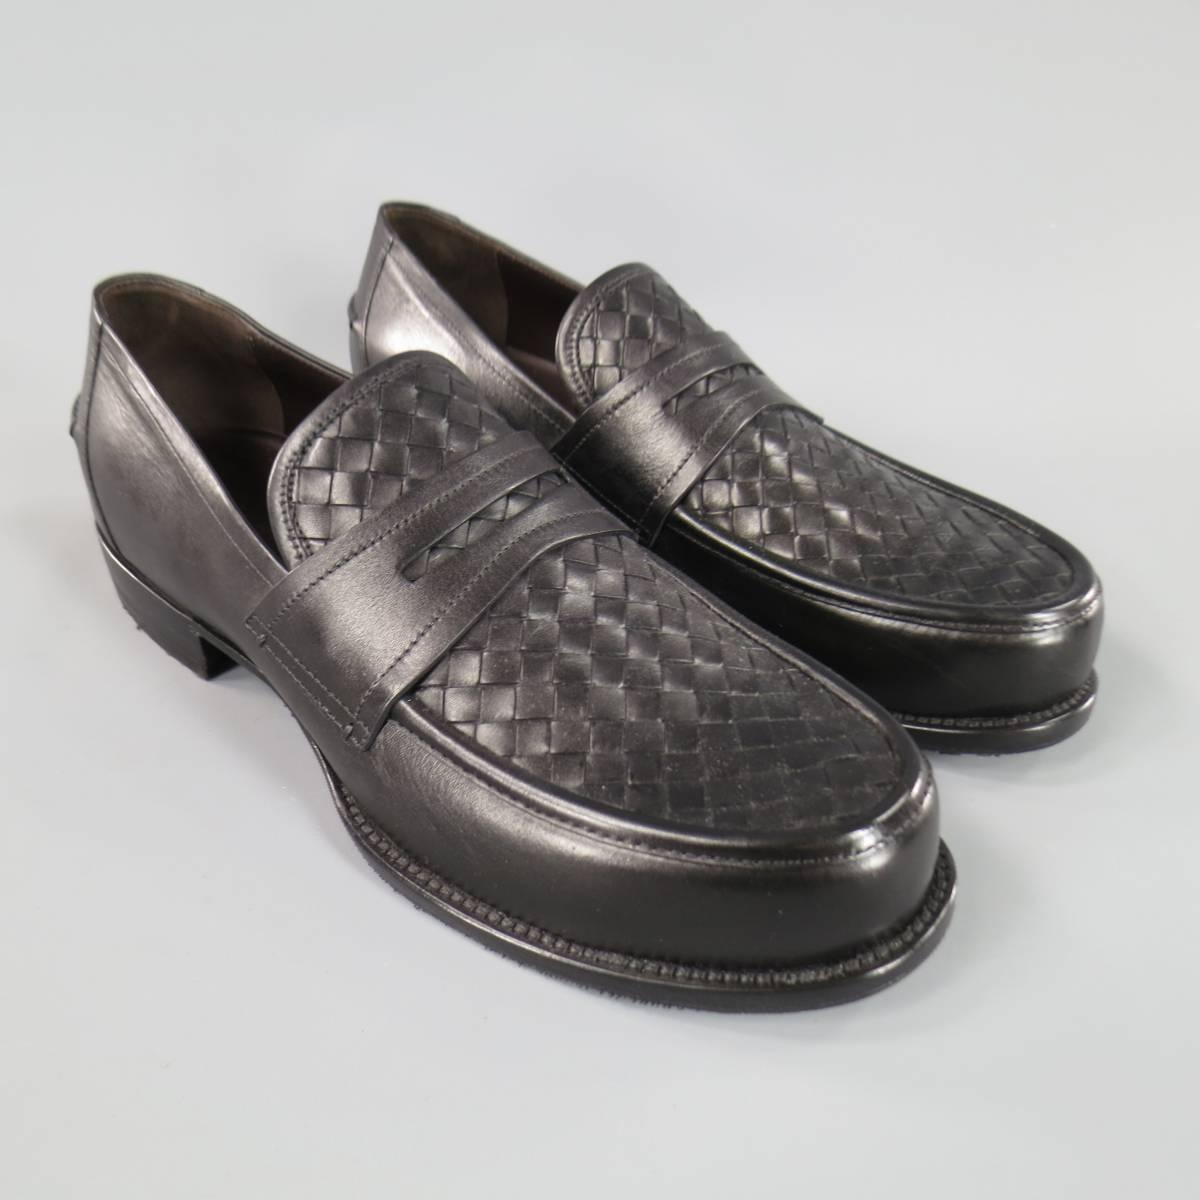 BOTTEGA VENETA classic penny loafers in smooth black leather with signature woven Intrecciato panel and low heel. Made in Italy. Retails at $870.00.
 
Pre- Owned Brand New Condition.
Marked: 54
 
12 X 4 in.